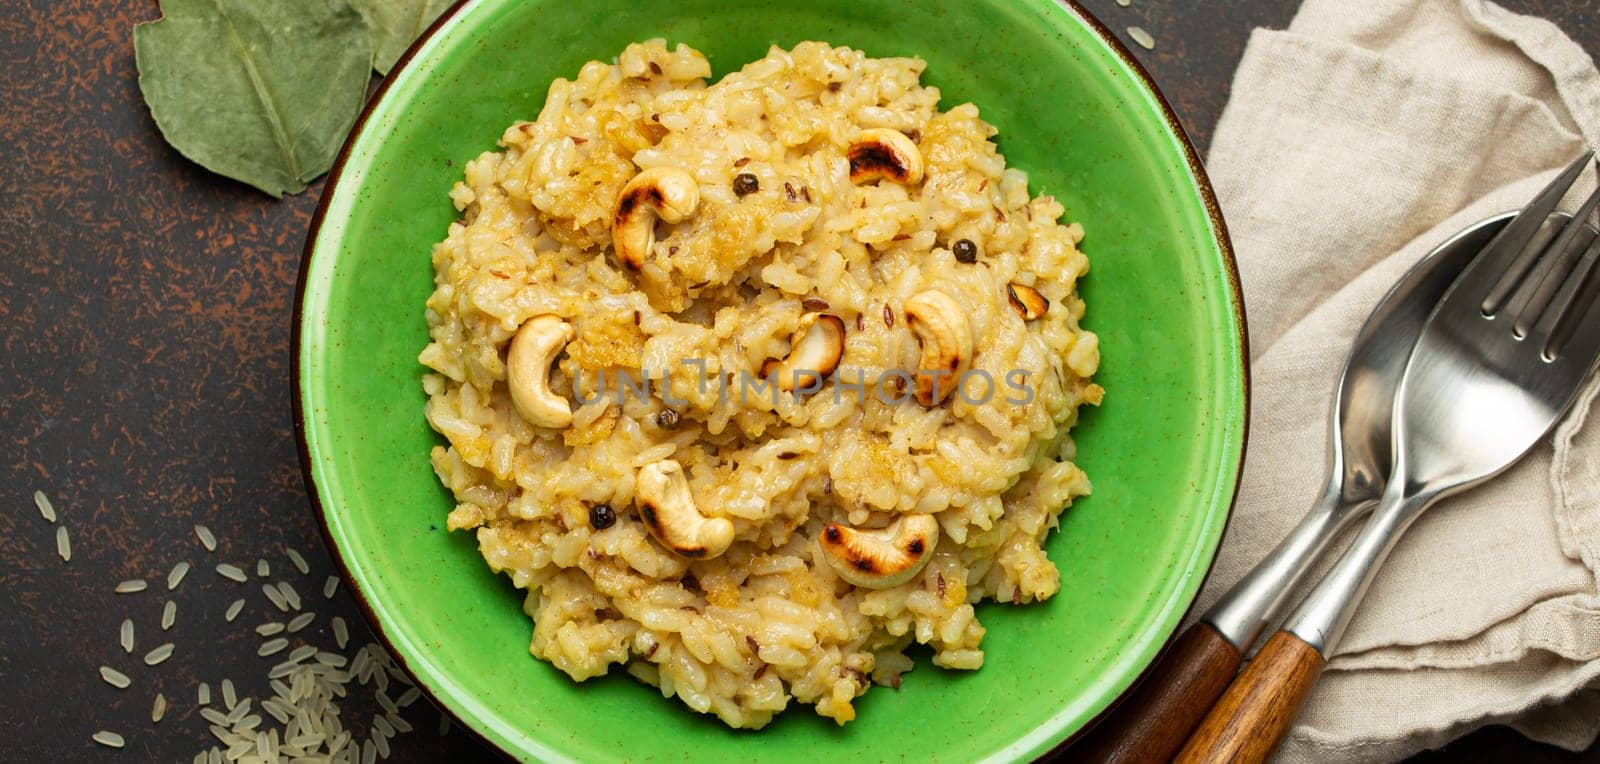 Ven Pongal (Khara Pongal), traditional Indian savoury rice dish made during celebrating Pongal festival, served in bowl top view on concrete rustic background.